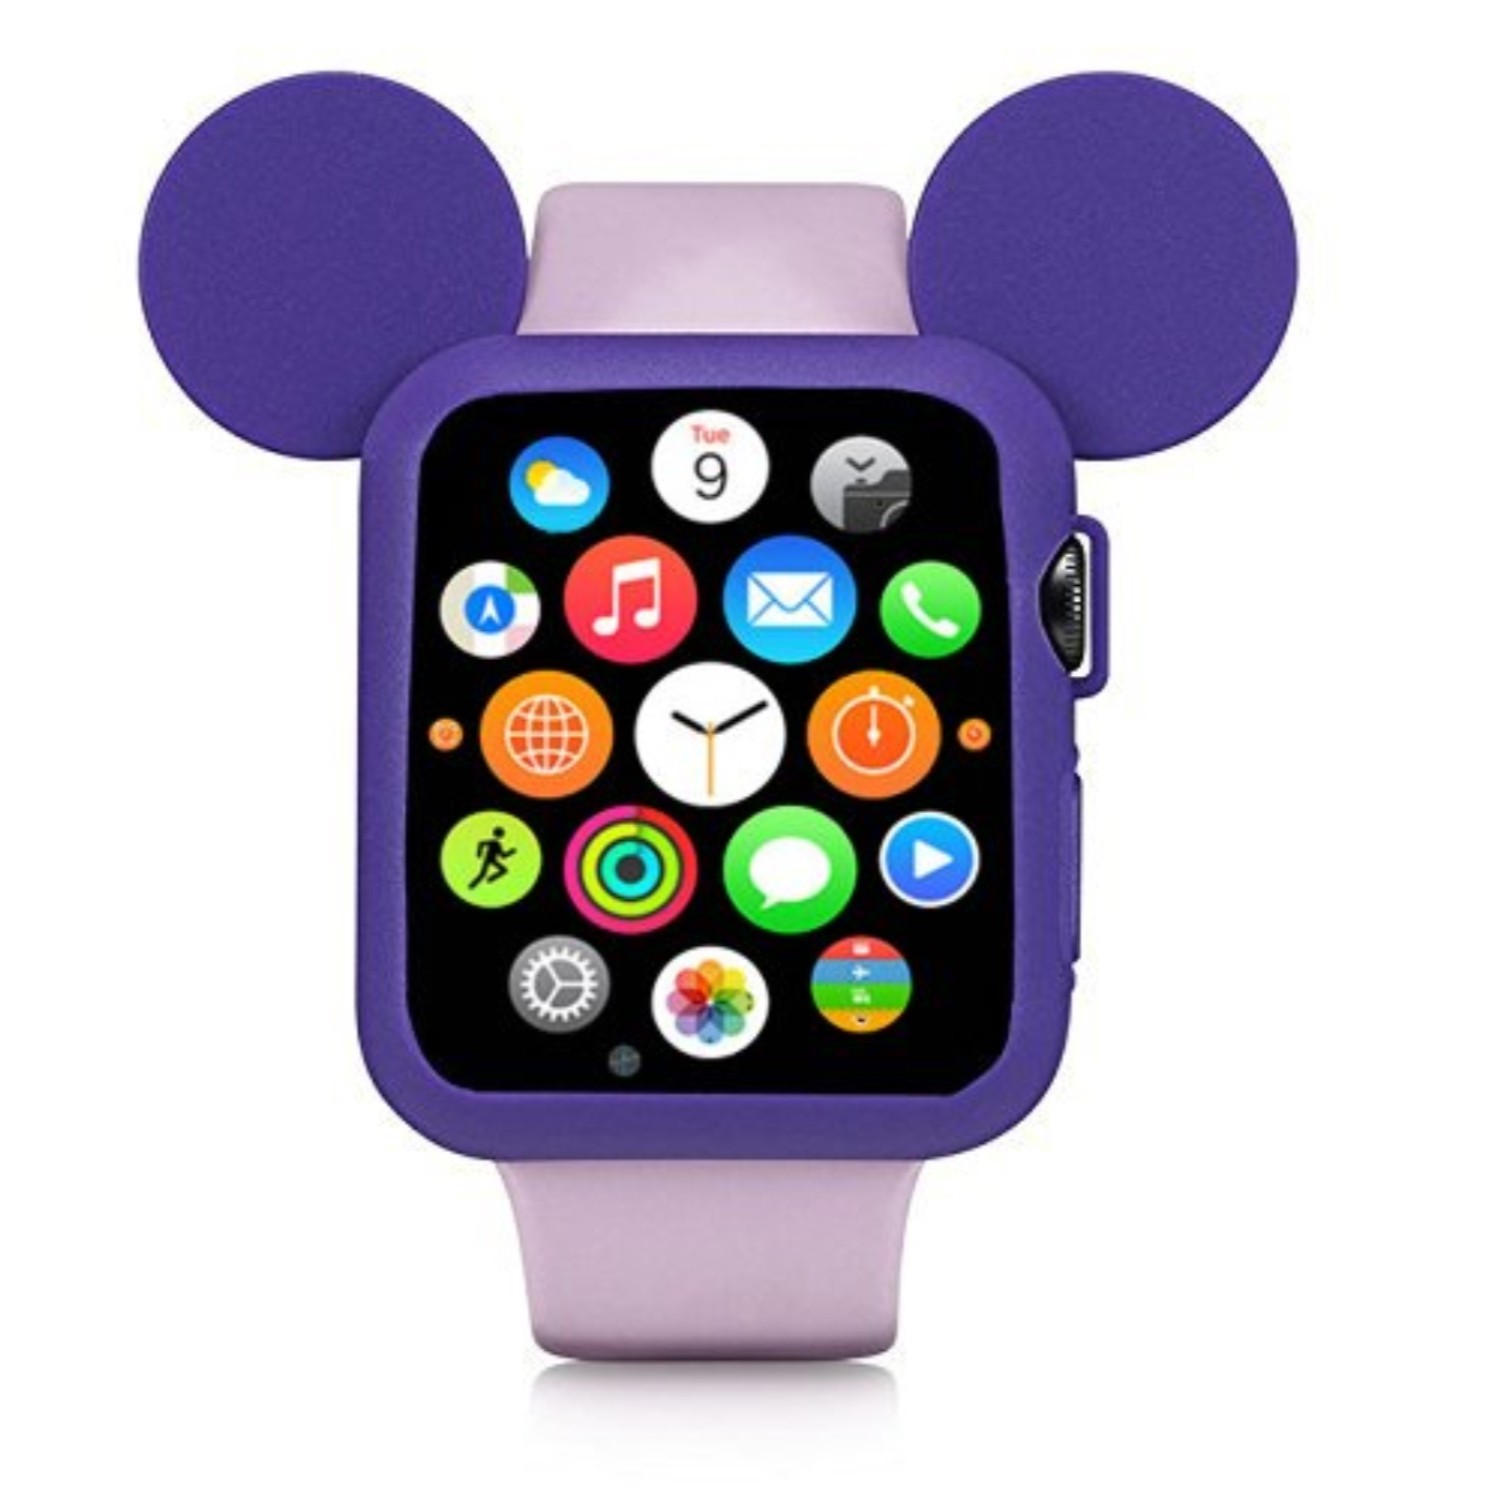 Soft Silicone Protective Apple Watch Case Cover Disney characters Mickey Mouse ears - 42mm